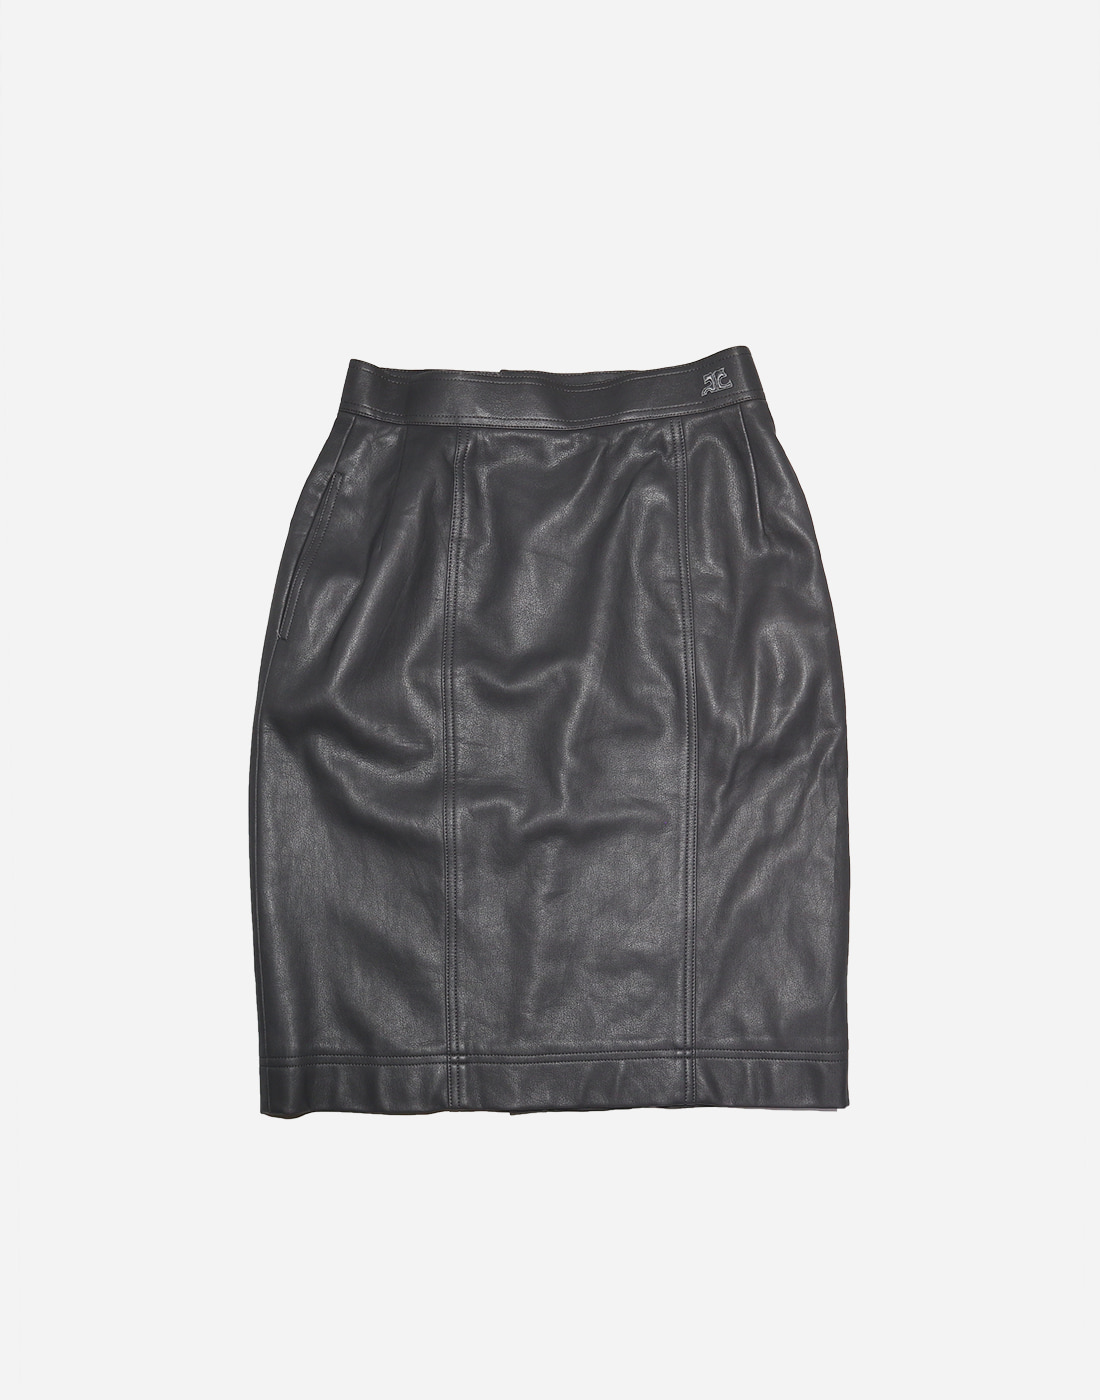 COURREGES Leather Skirt, Charcoal